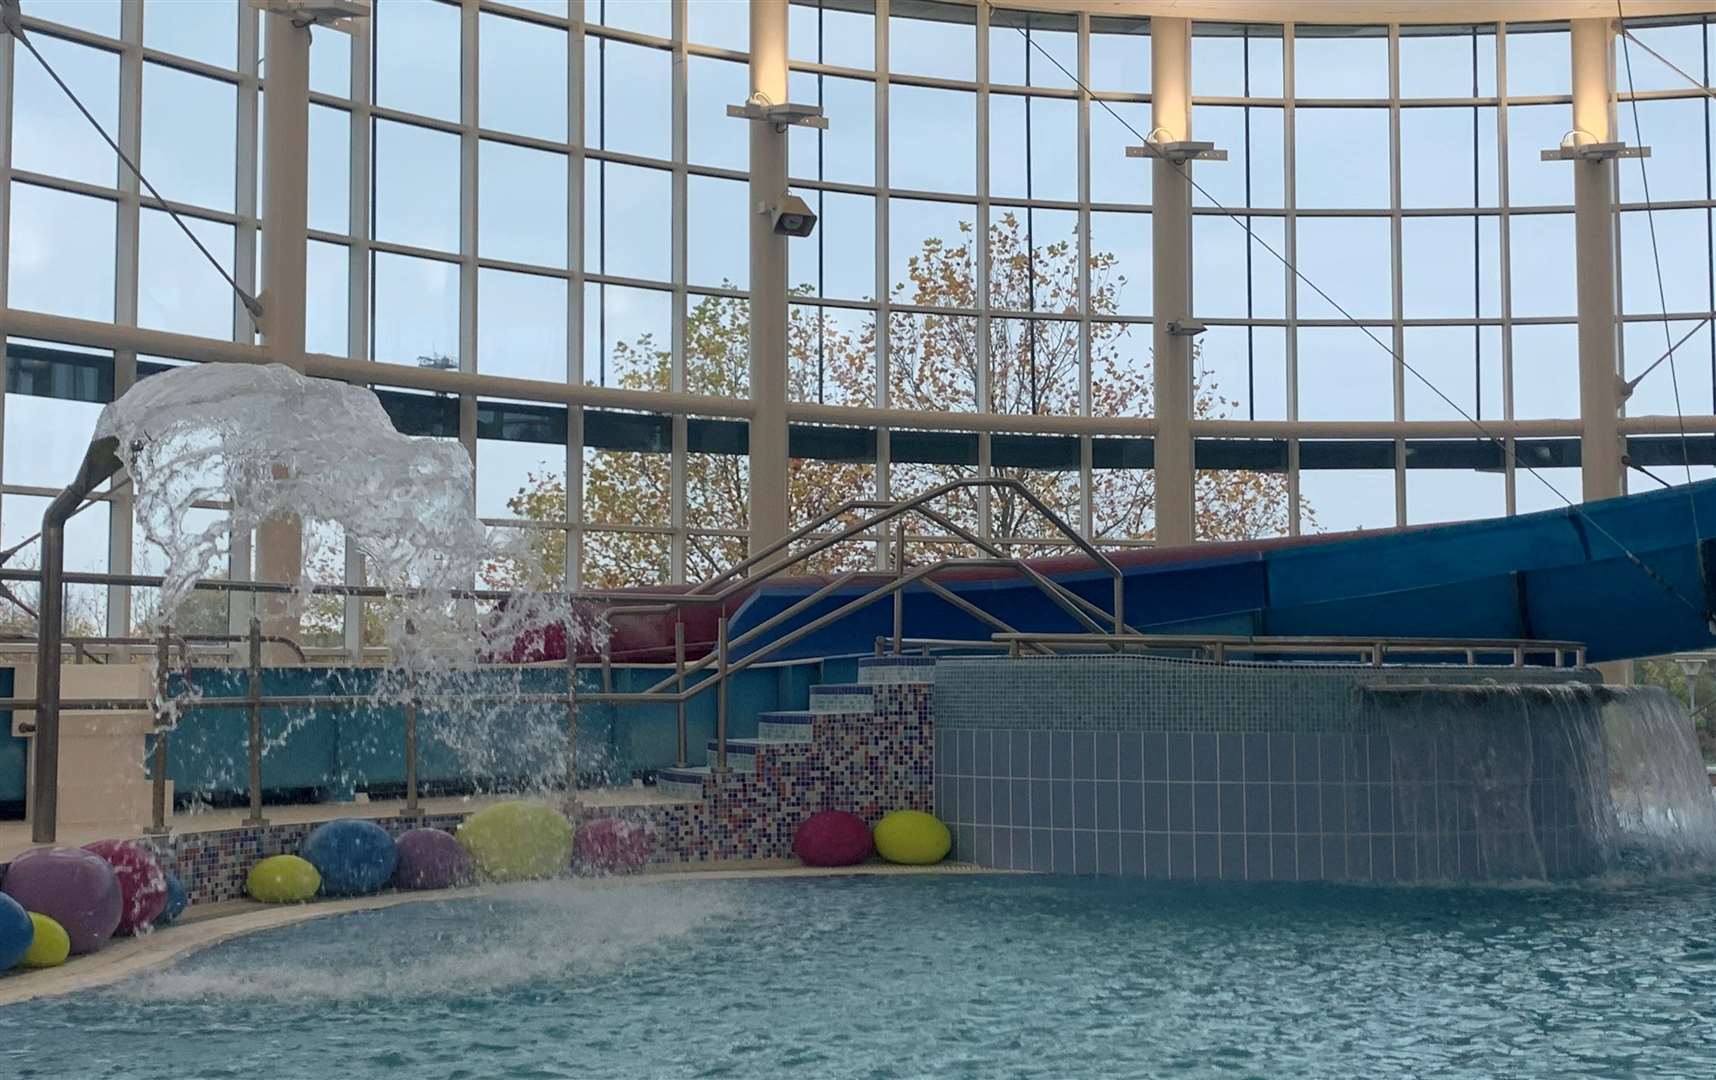 One of the pool areas following its multi-million-pound refurbishment in 2021